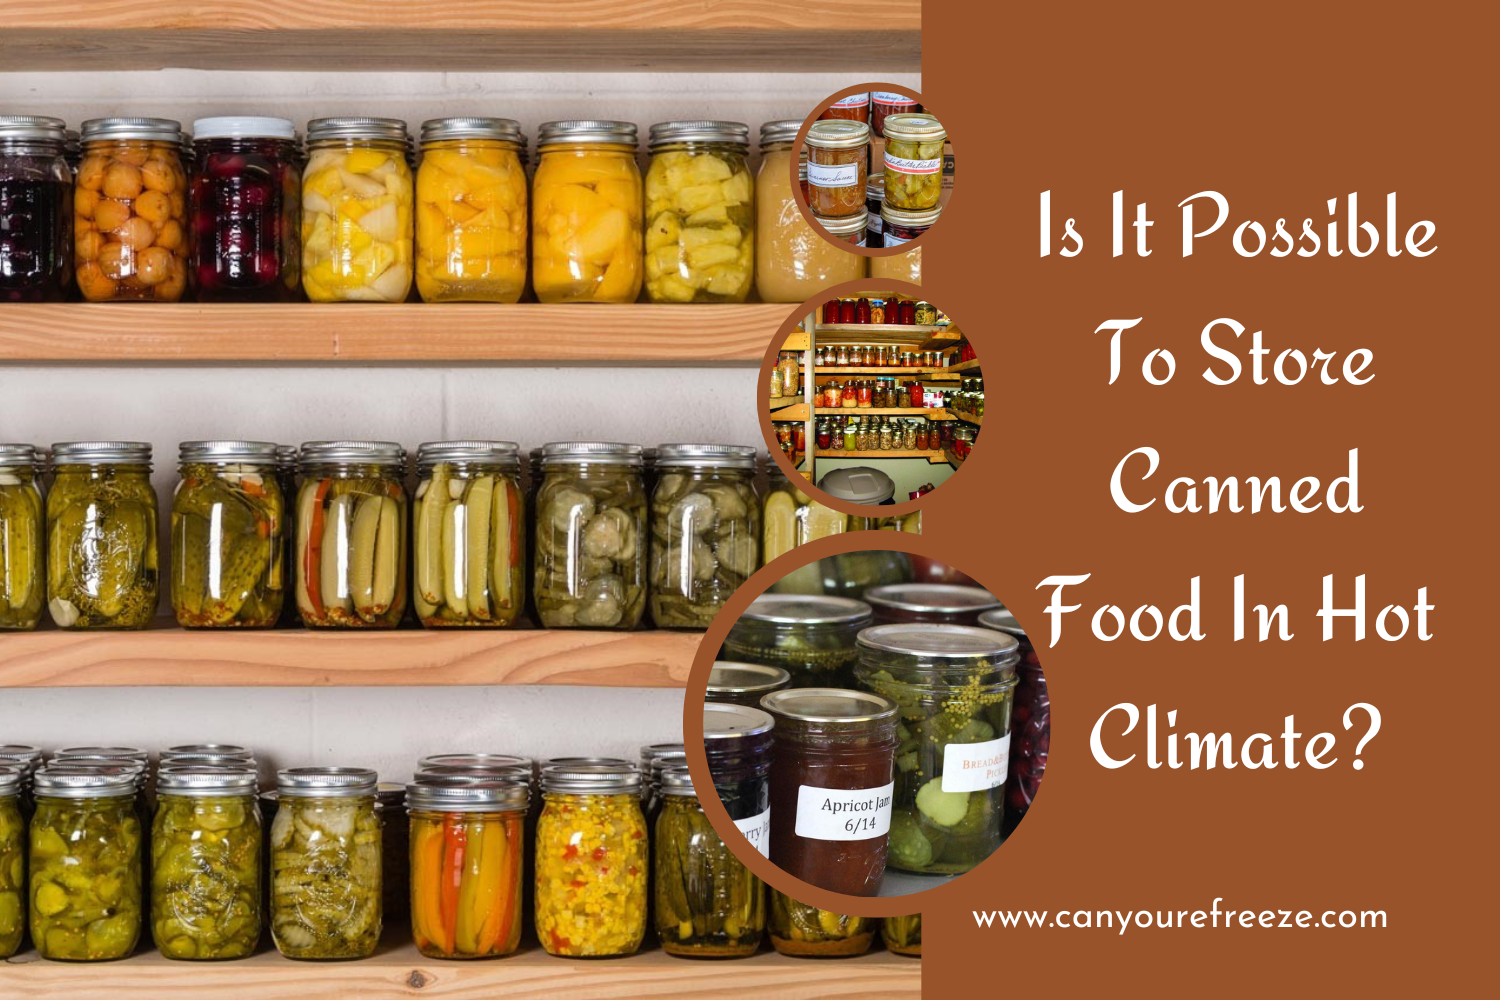 Is It Possible To Store Canned Food In Hot Climate